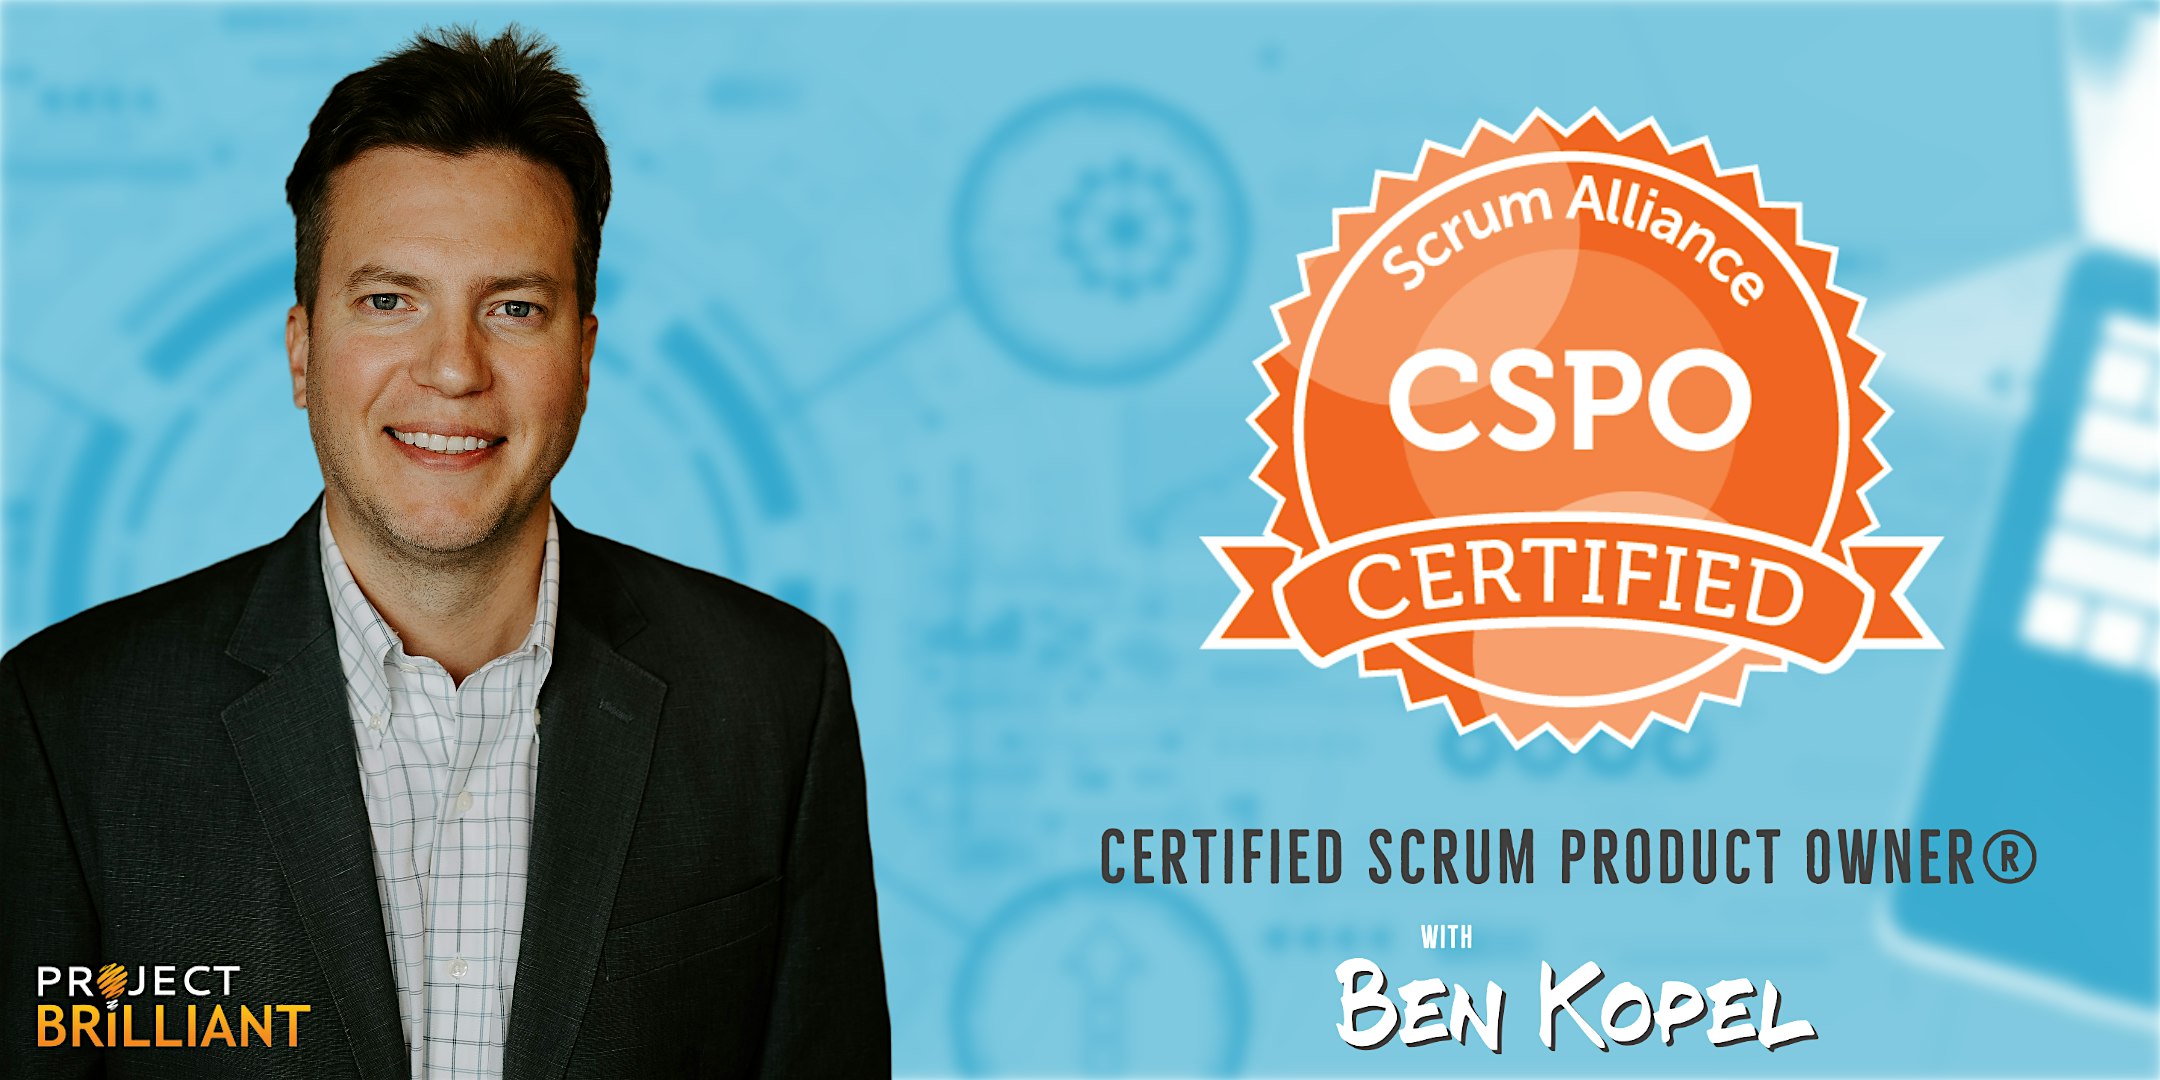 Certified Scrum Product Owner® (CSPO) Virtual class